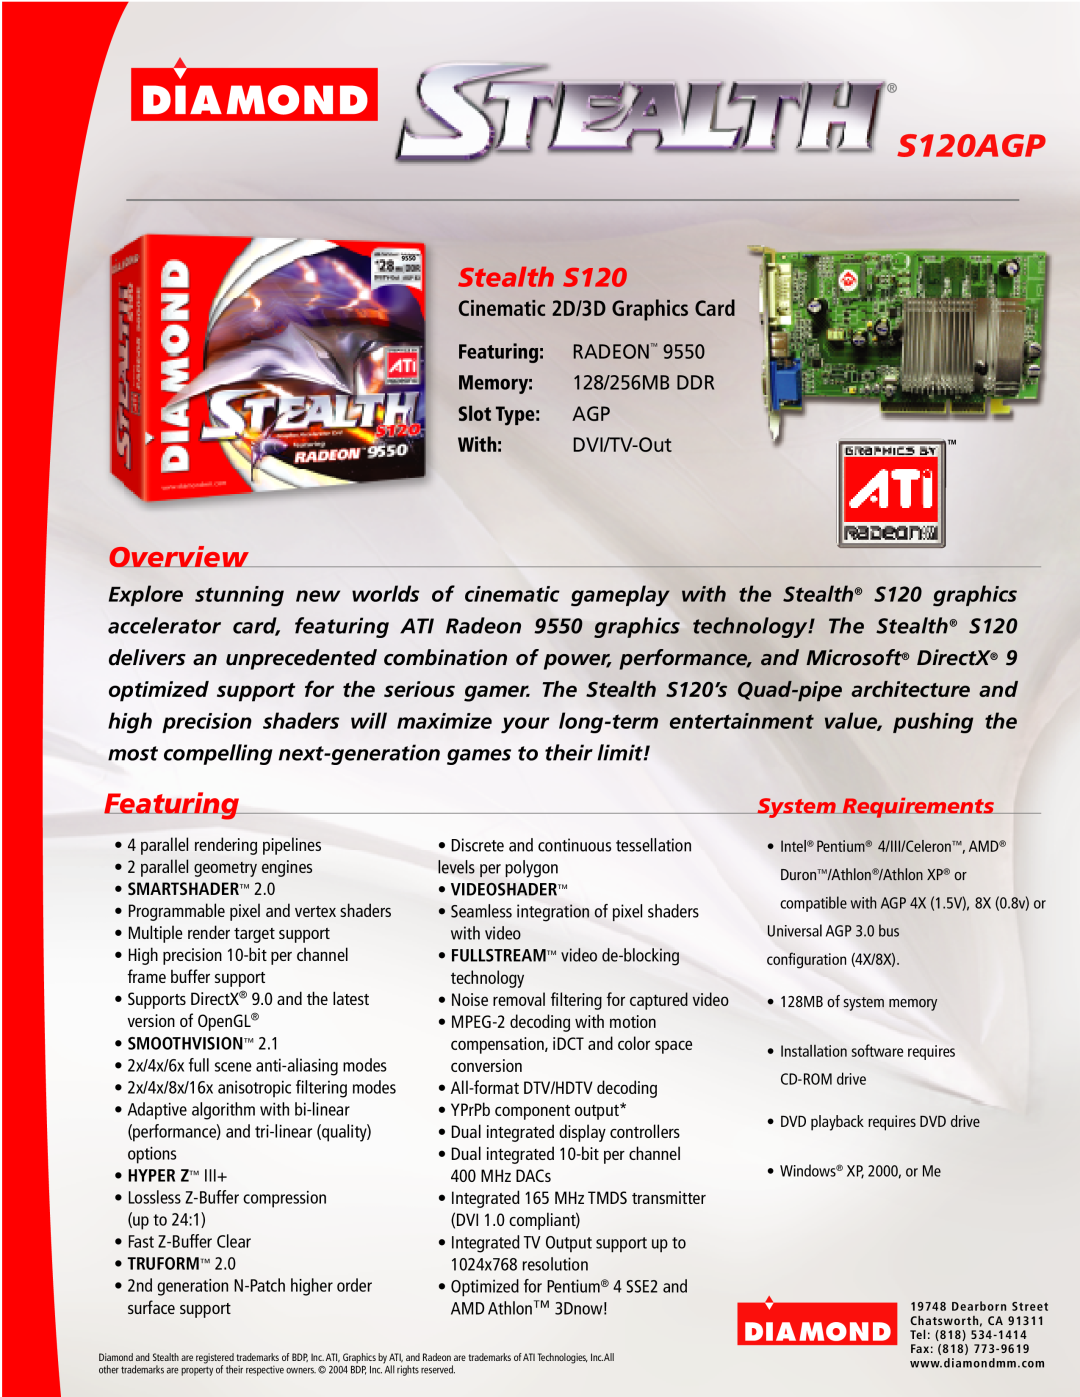 Diamond Multimedia manual S120AGP, Overview, Stealth S120, Cinematic 2D/3D Graphics Card, Featuring RADEONTM 